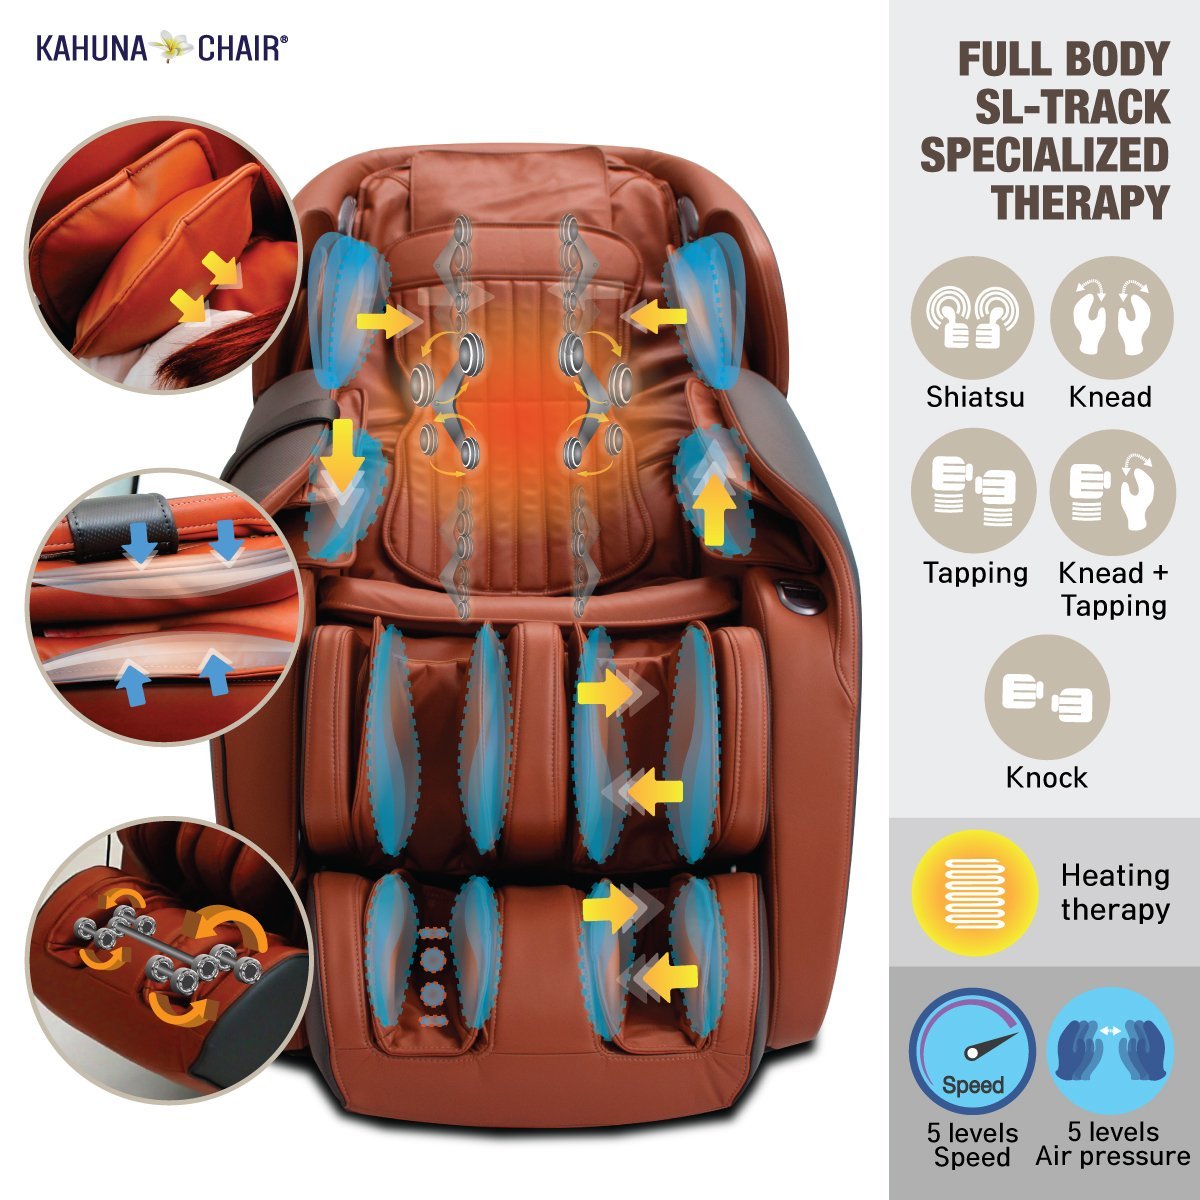 Kahuna LM7000 massage chair full-body Sl-track special therapy